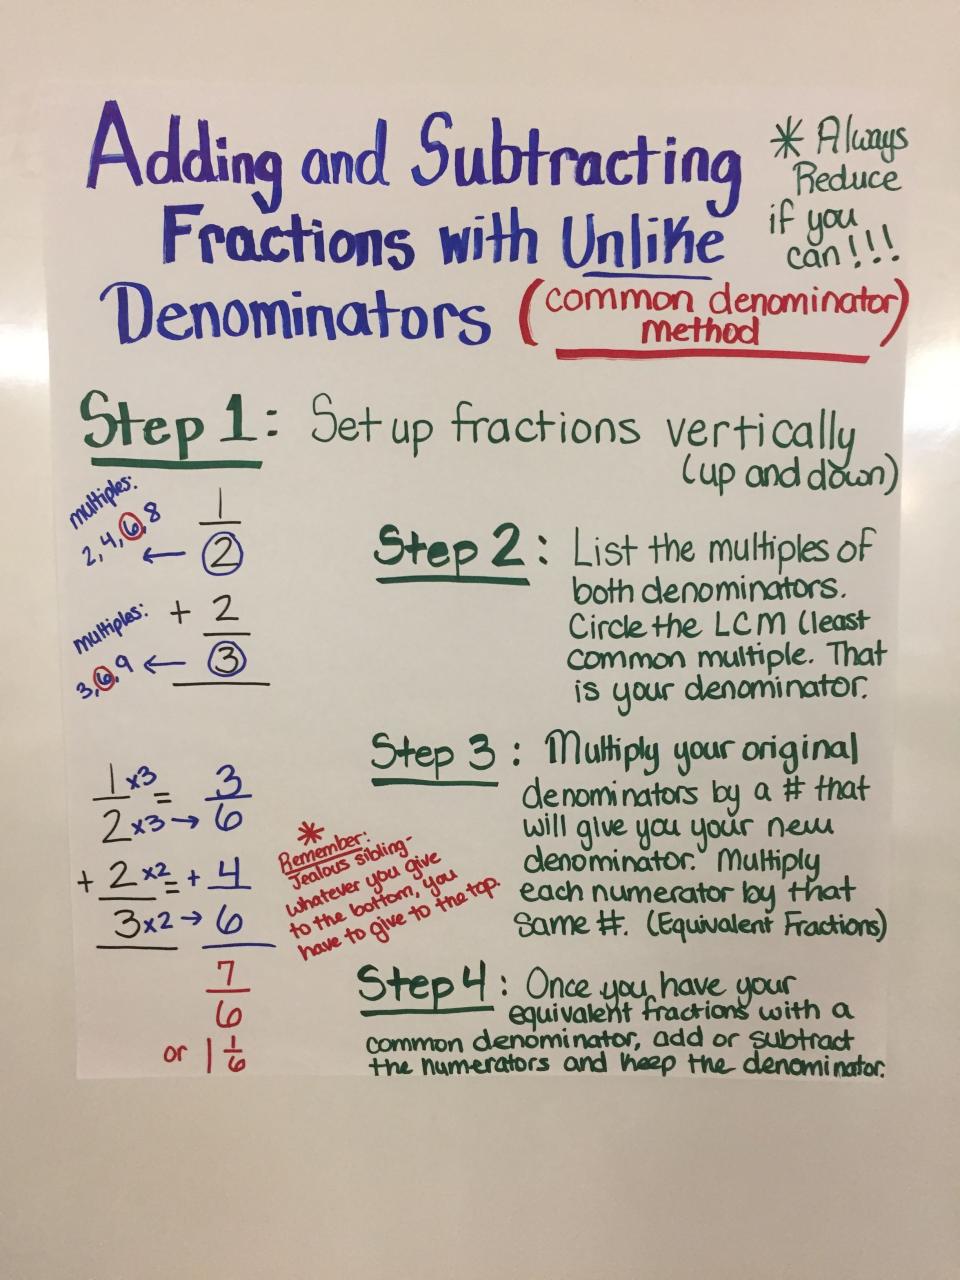 Adding and subtracting fractions with unlike denominators common